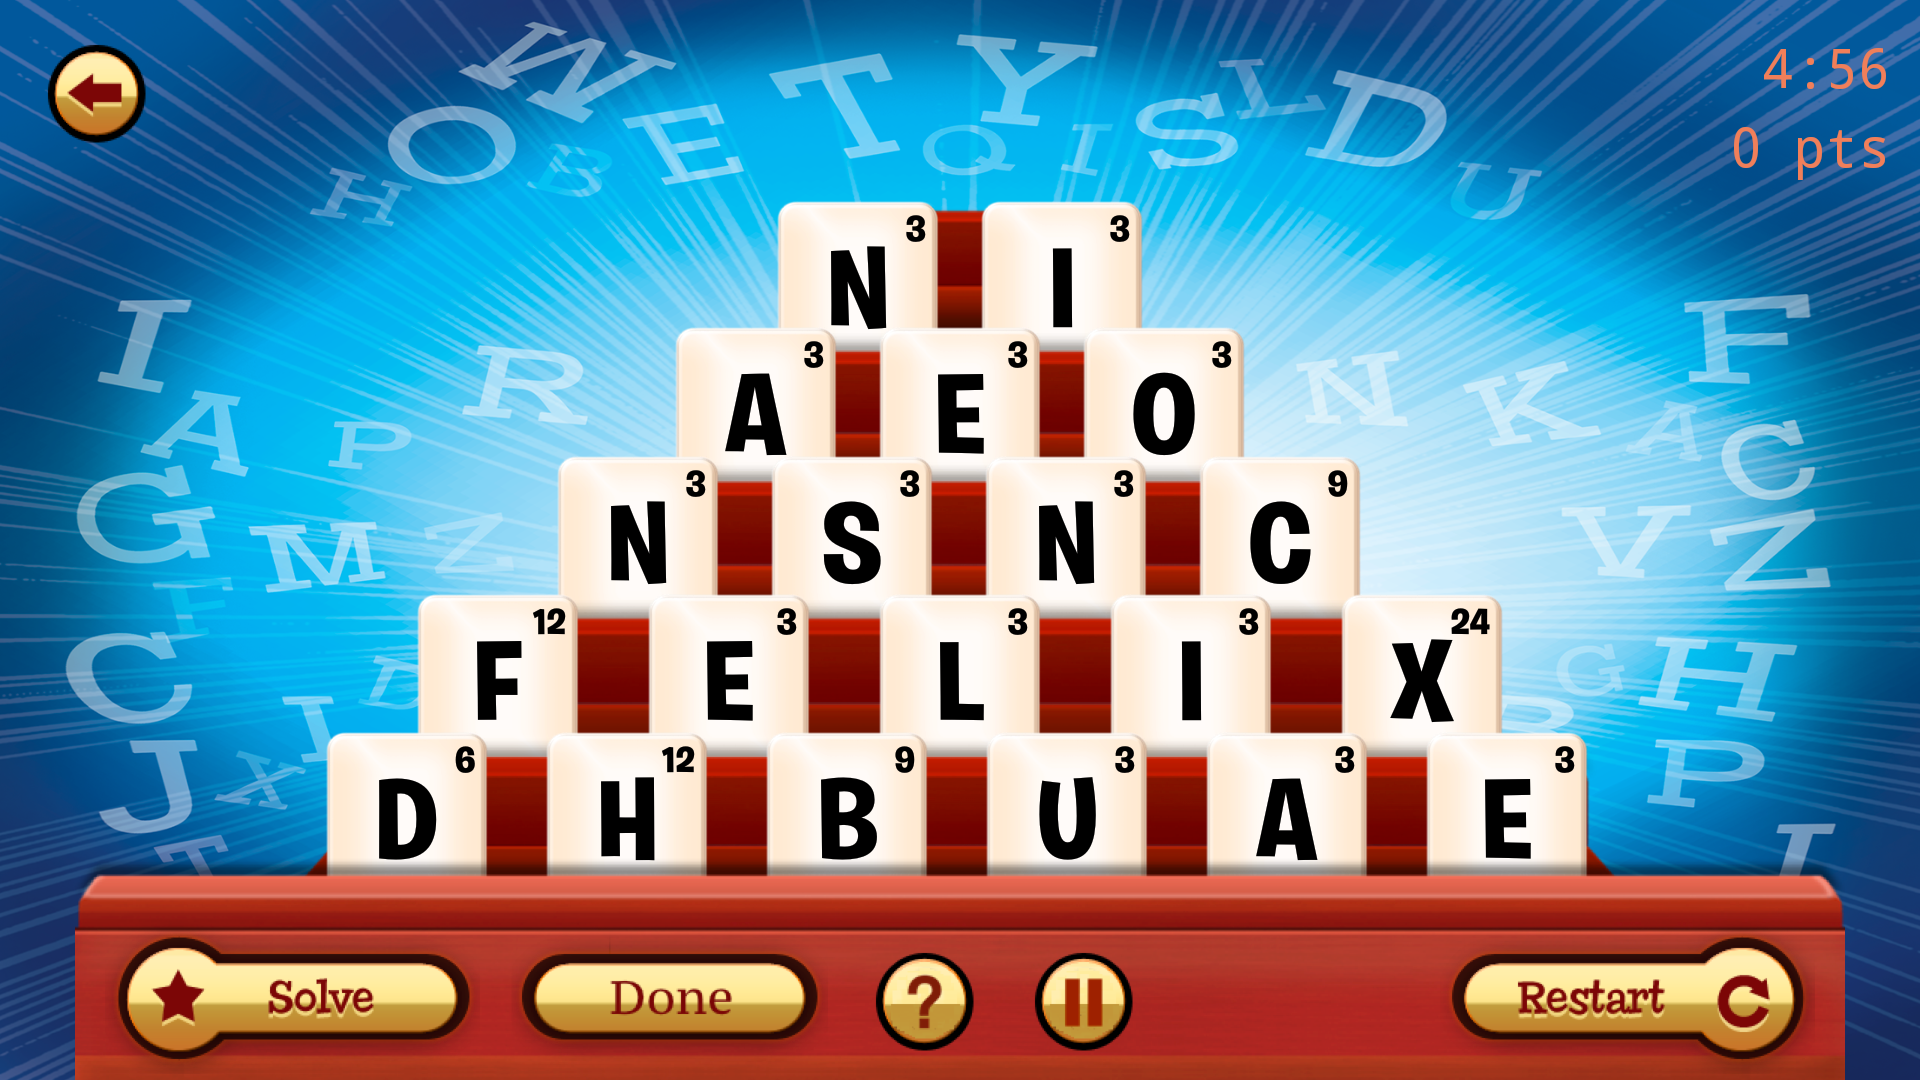 Android application Dabble A Fast Paced Word Game screenshort